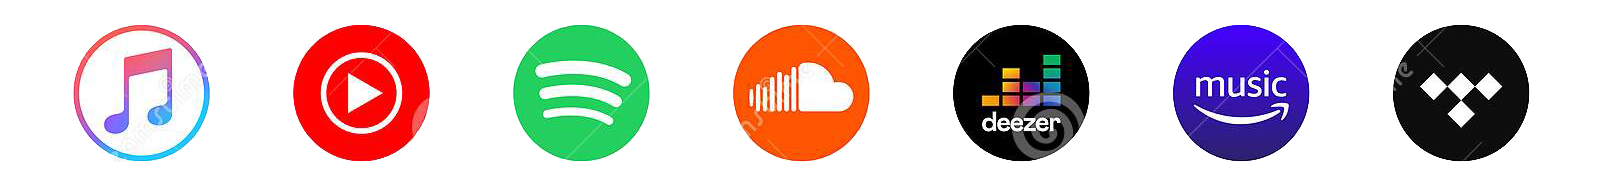 apple-music-spotify-youtube-misic-soundcloud-deezer-tidal-amazon-collection-popular-streaming-services-logo-service-editorial-196205477